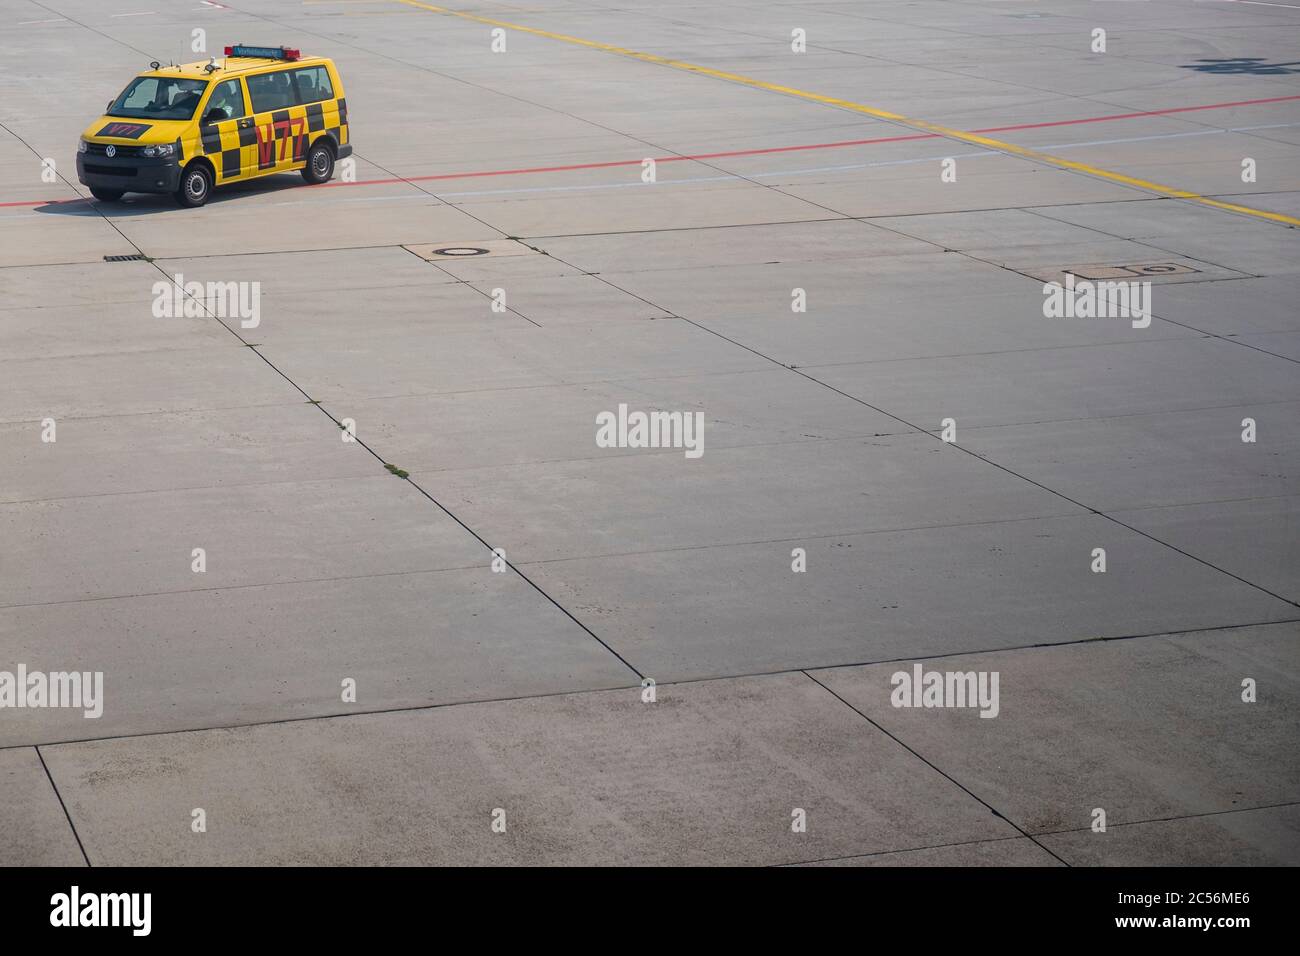 Follow-me-car on the apron at the airport Stock Photo